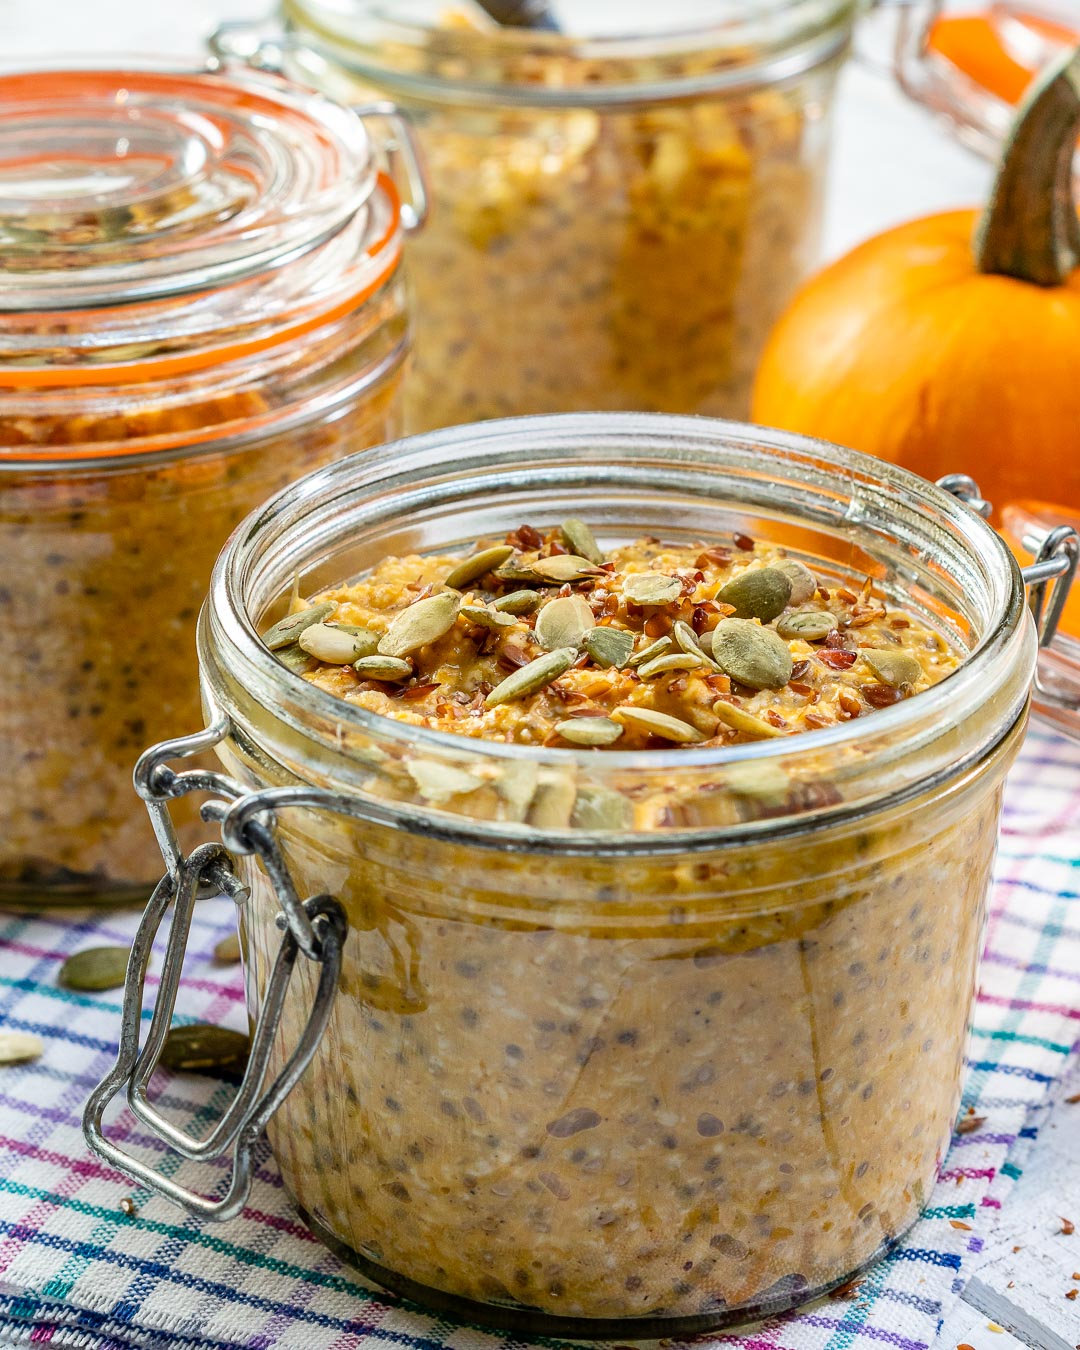 Pumpkin Pie Overnight Oats to Spice Up Your Life! | Clean Food Crush